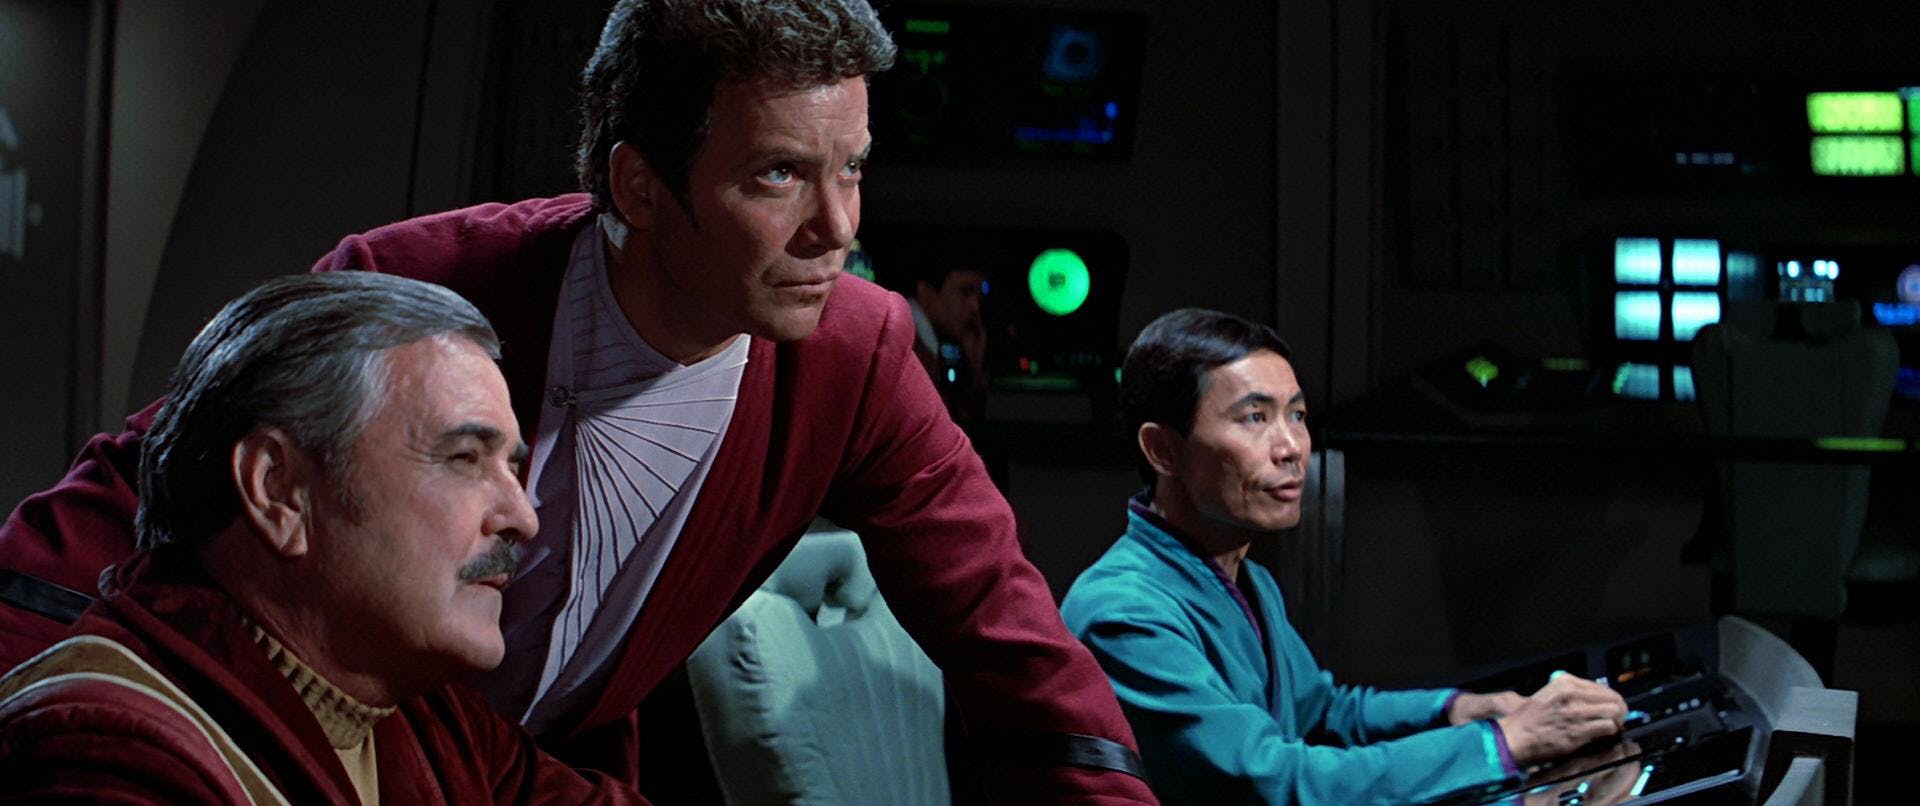 James Kirk leans over between Montgomery Scott and Hikaru Sulu at their stations as they all stare intently at the viewscreen in front of them in Star Trek: The Search for Spock